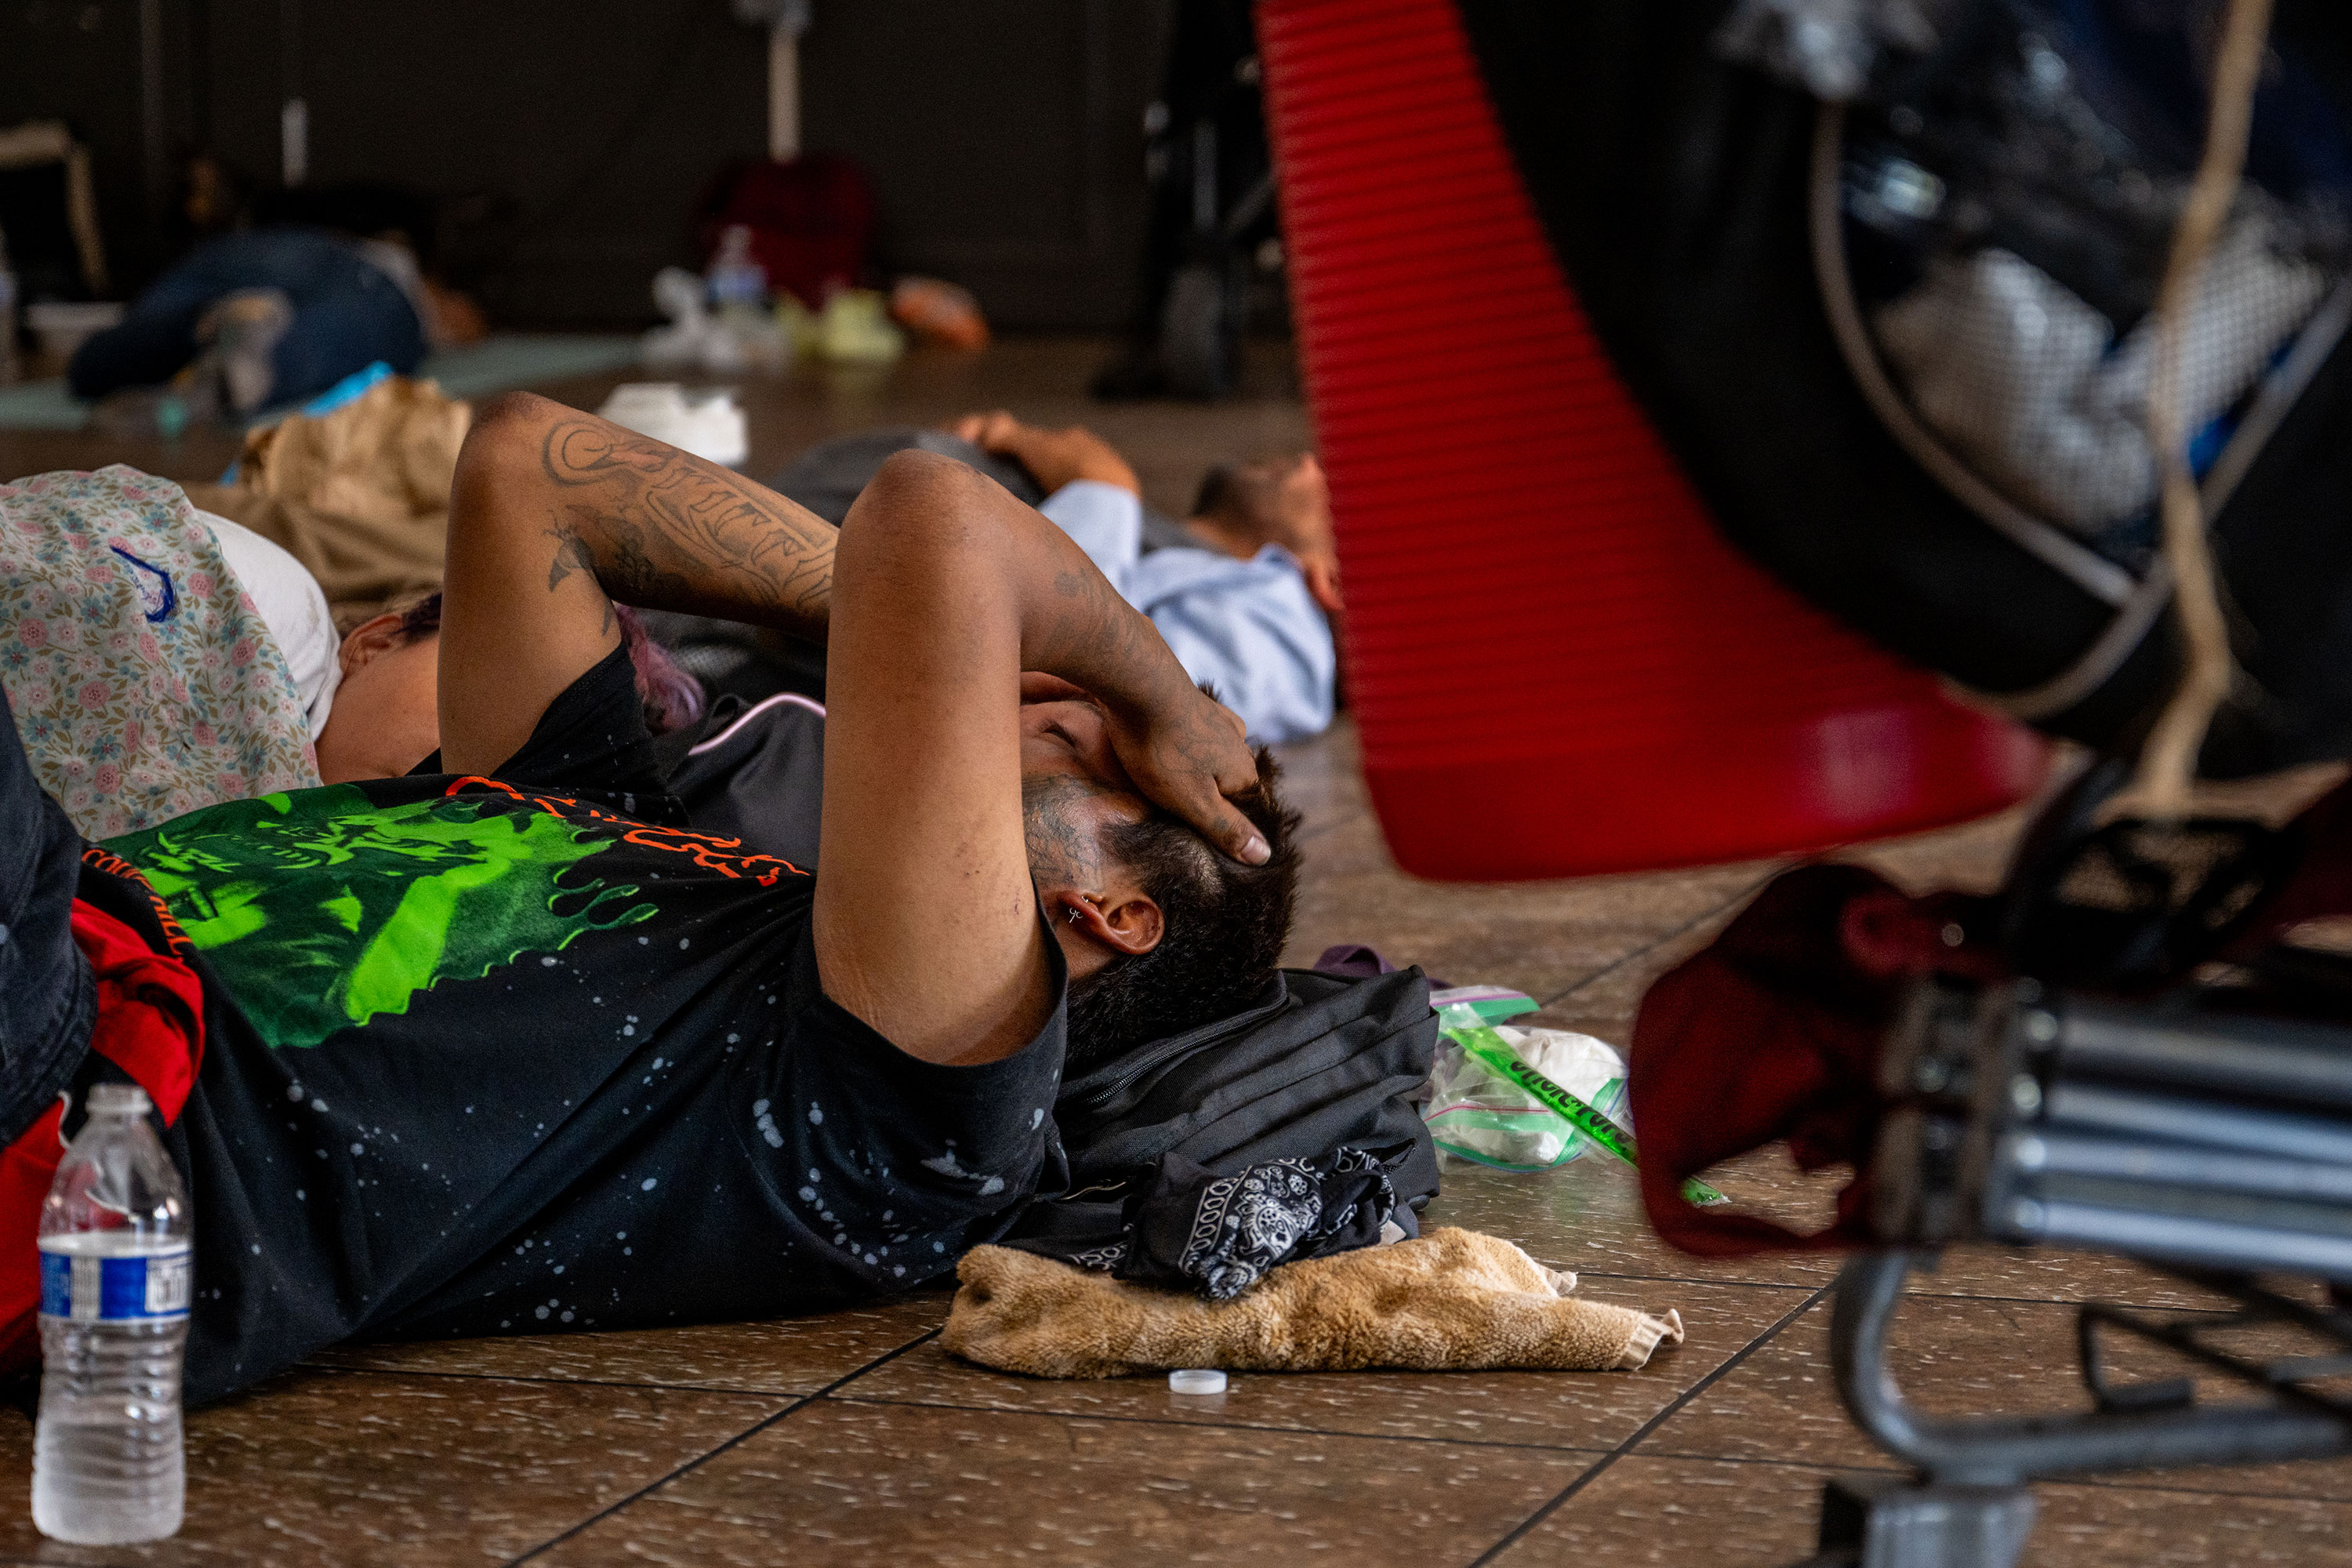 People seeking shelter from the heat rest at a cooling center in Phoenix on July 14.